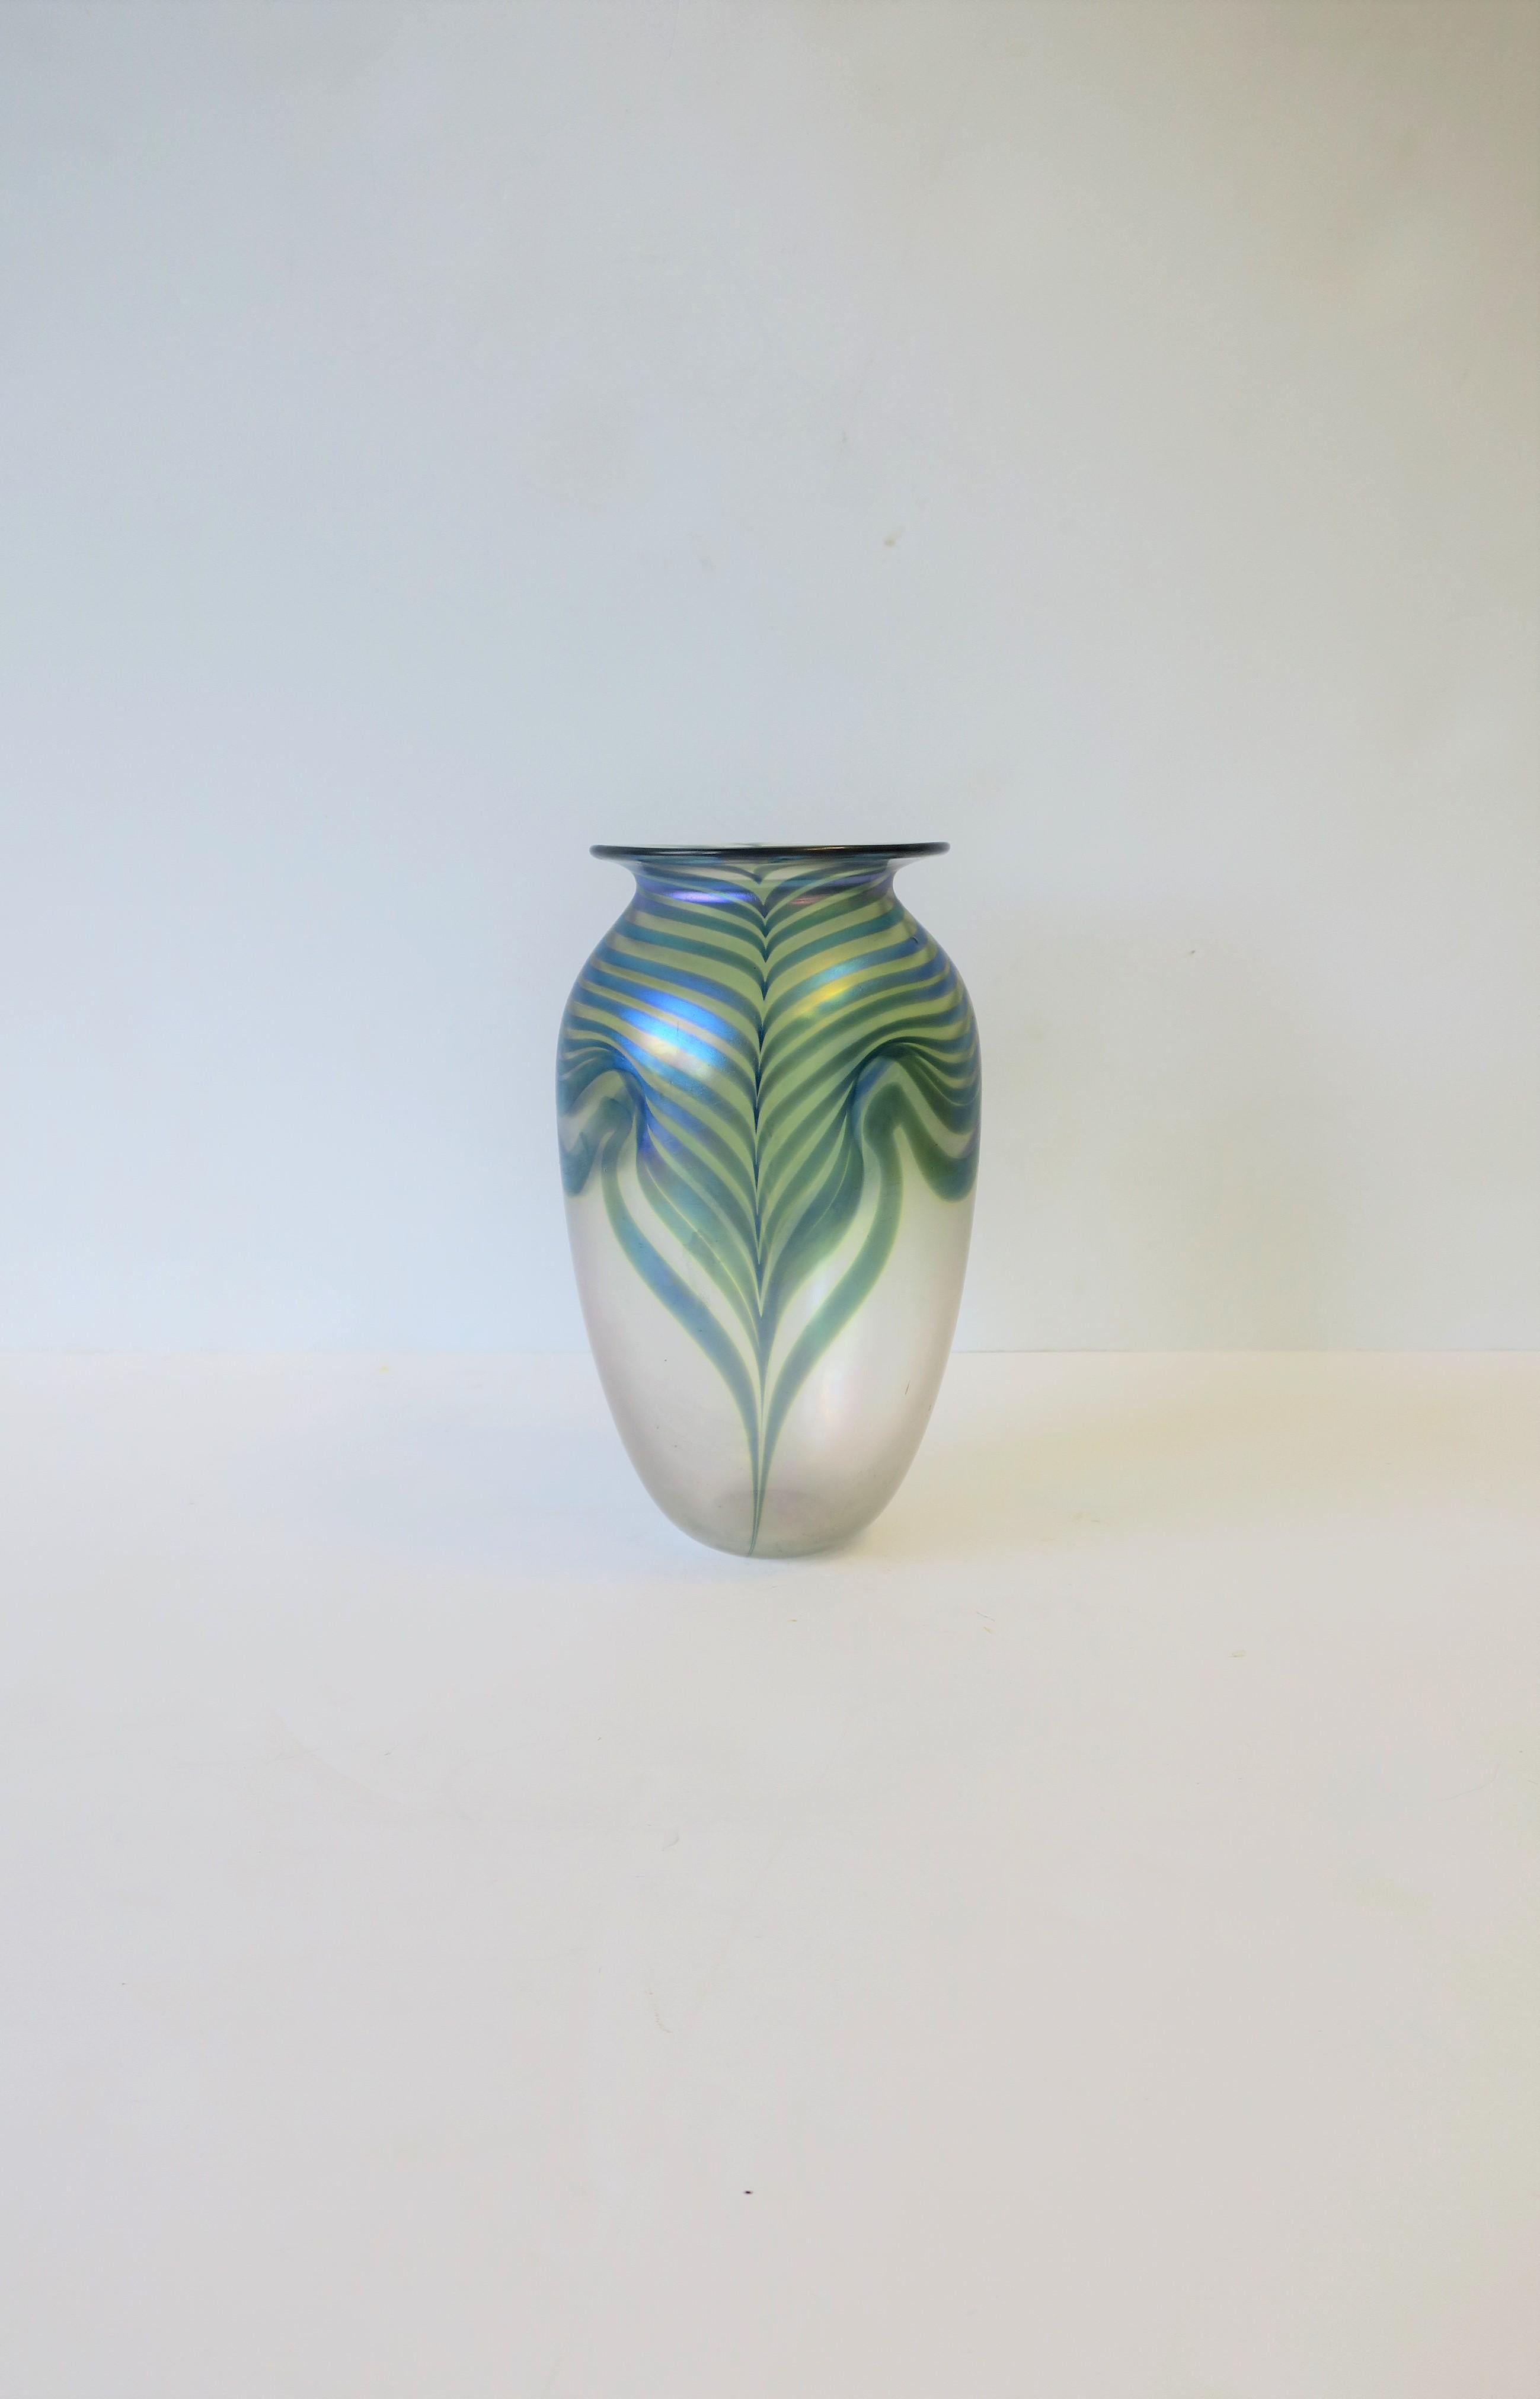 A very beautiful contemporary art glass vase in the Art Nouveau style, by artist Robert Eickholt, circa 1980s. Vase is signed 